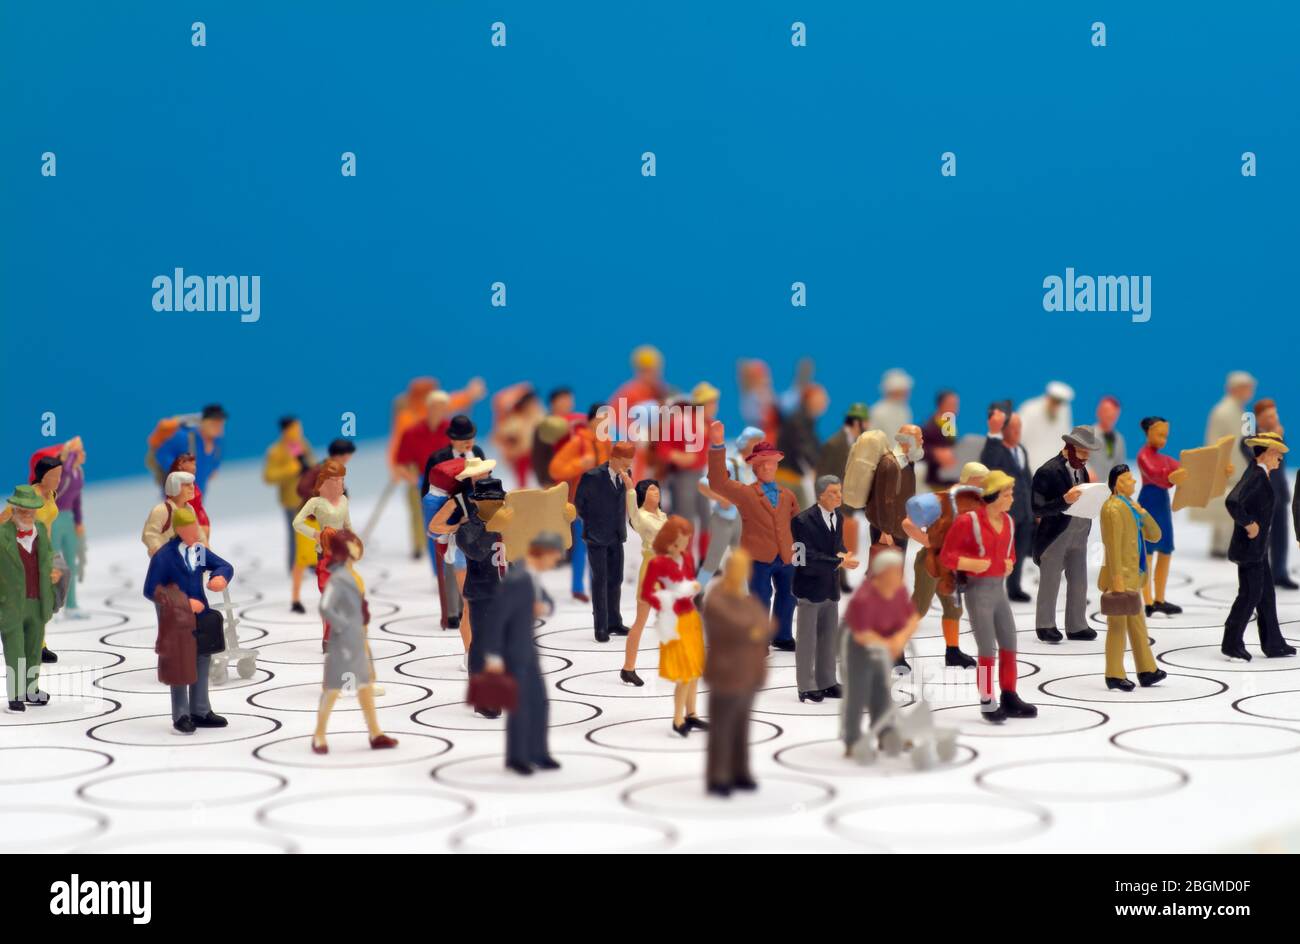 Miniature toys - social distancing conceptual image, people distancing each other in public places to avoid infection. Stock Photo